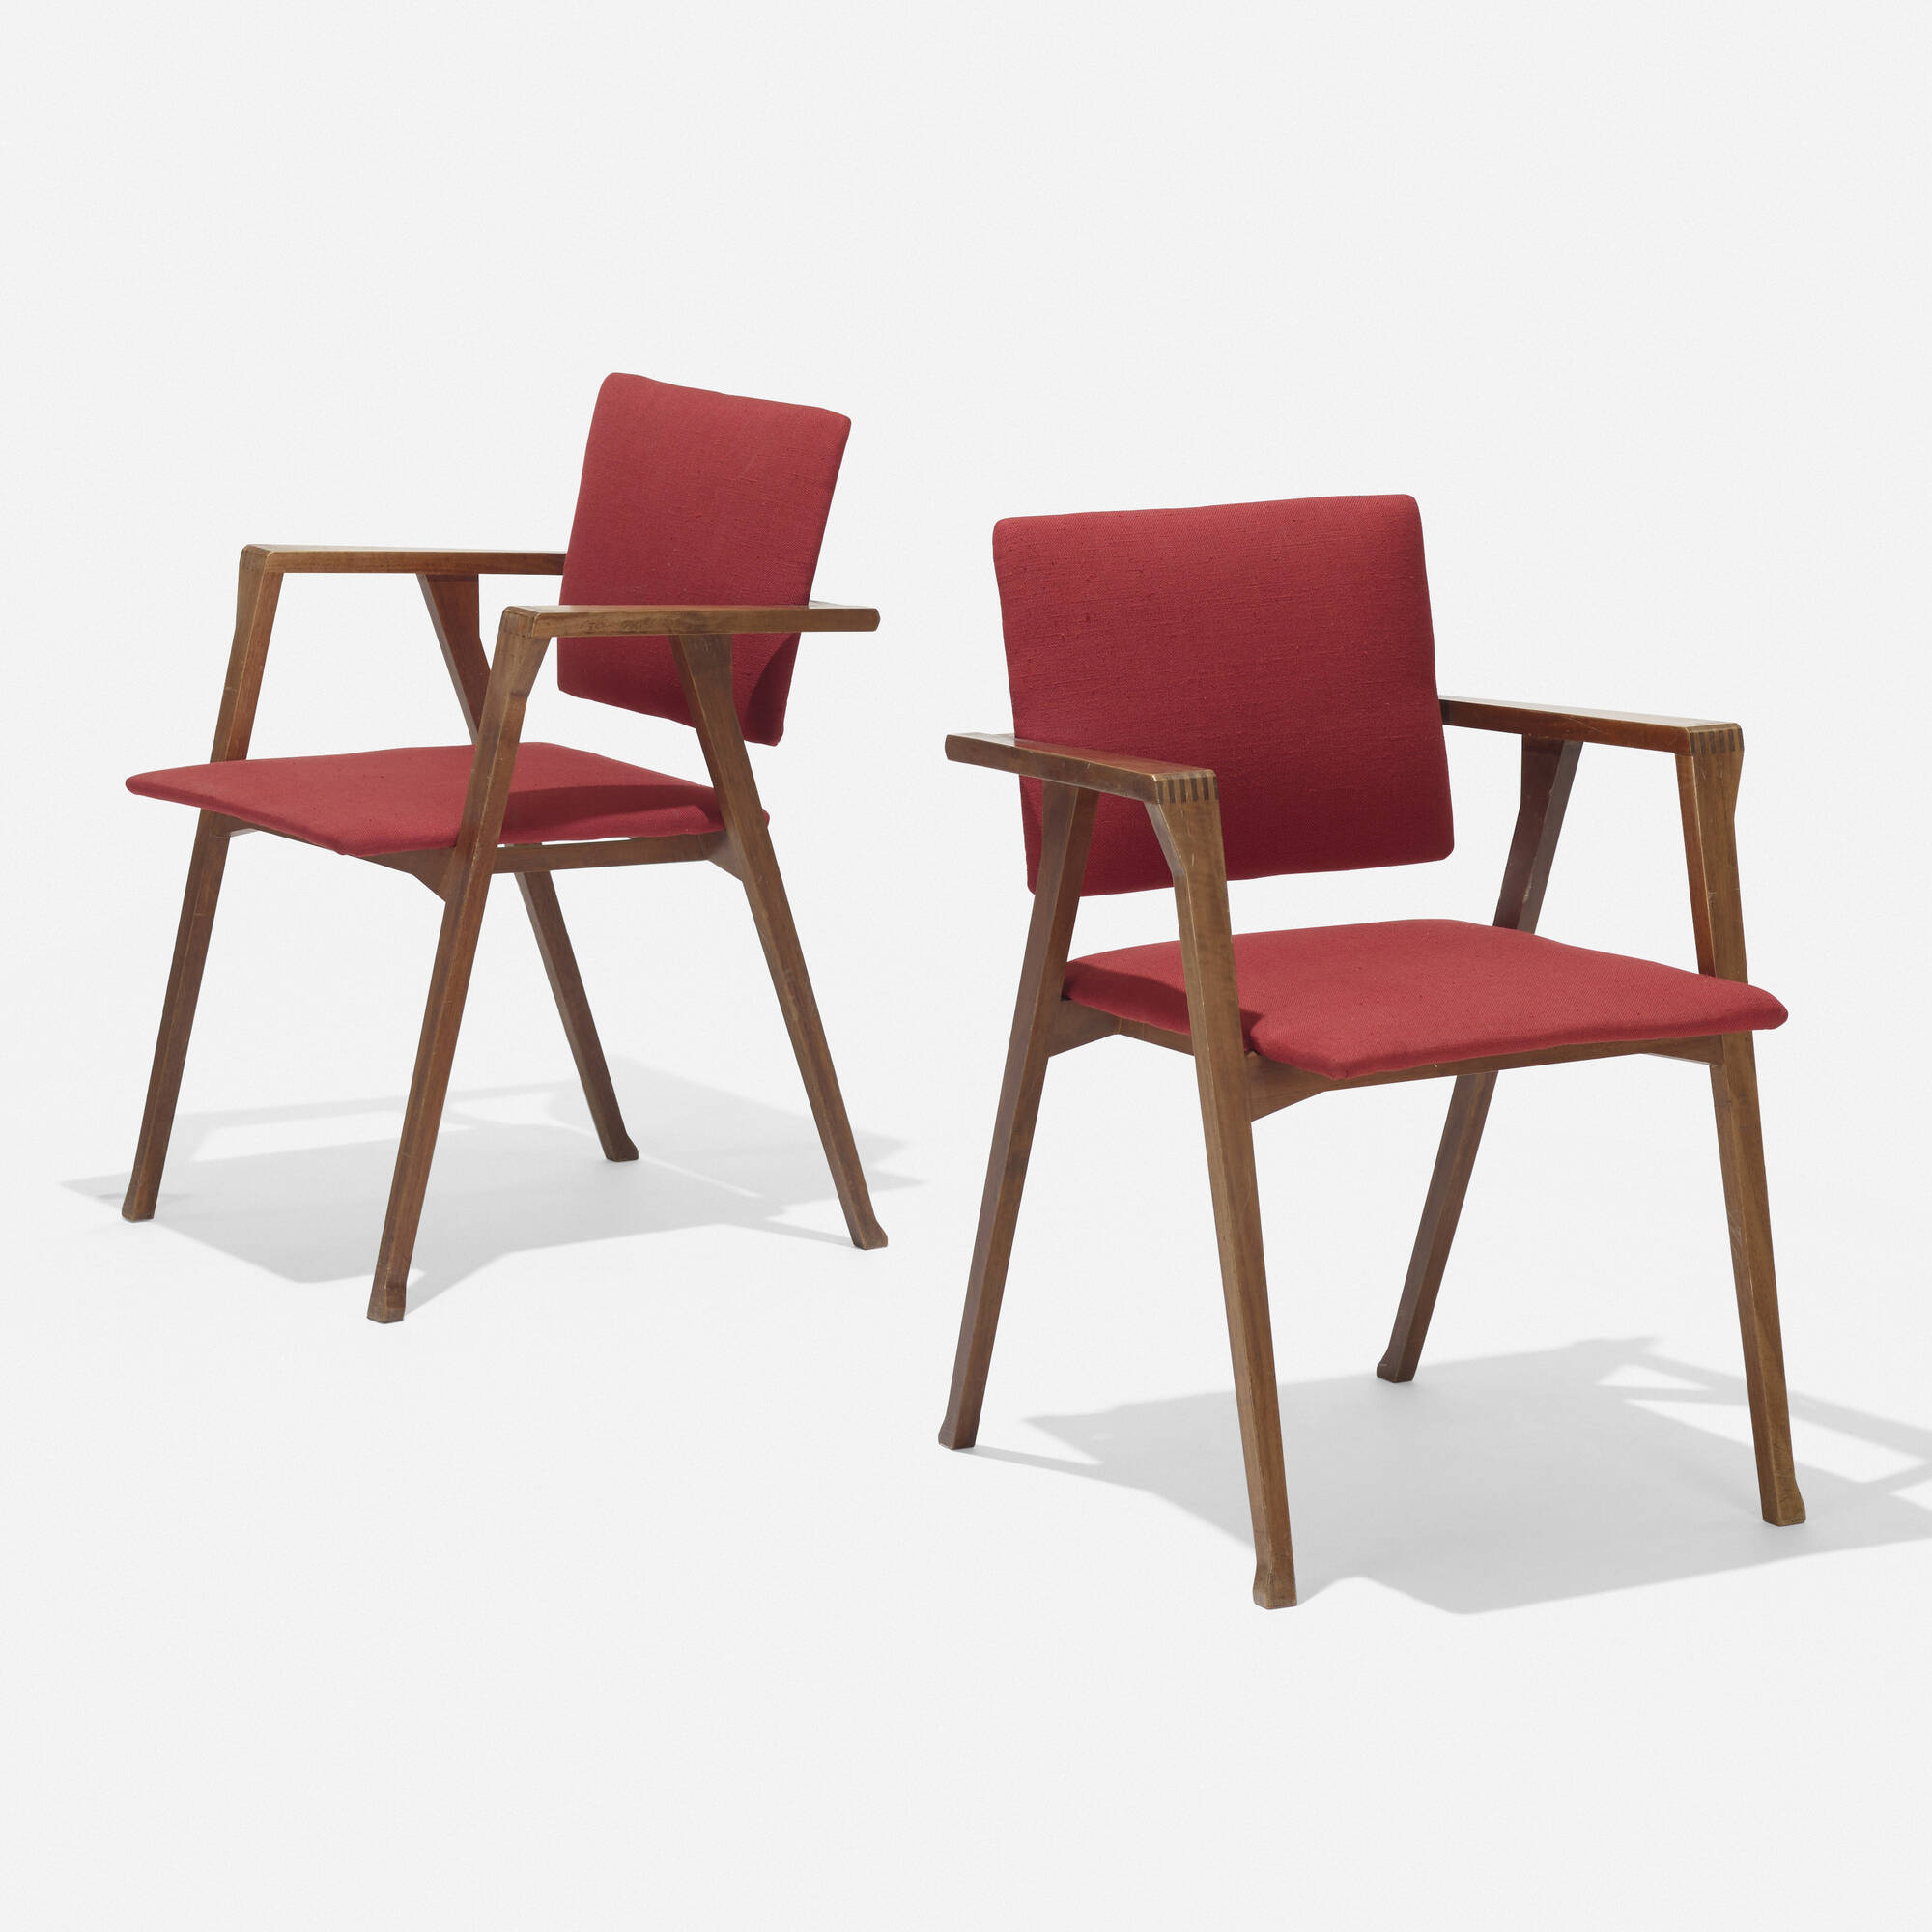 227: FRANCO ALBINI, Luisa chairs, pair < Design, 31 March 2022 < Auctions |  Wright: Auctions of Art and Design